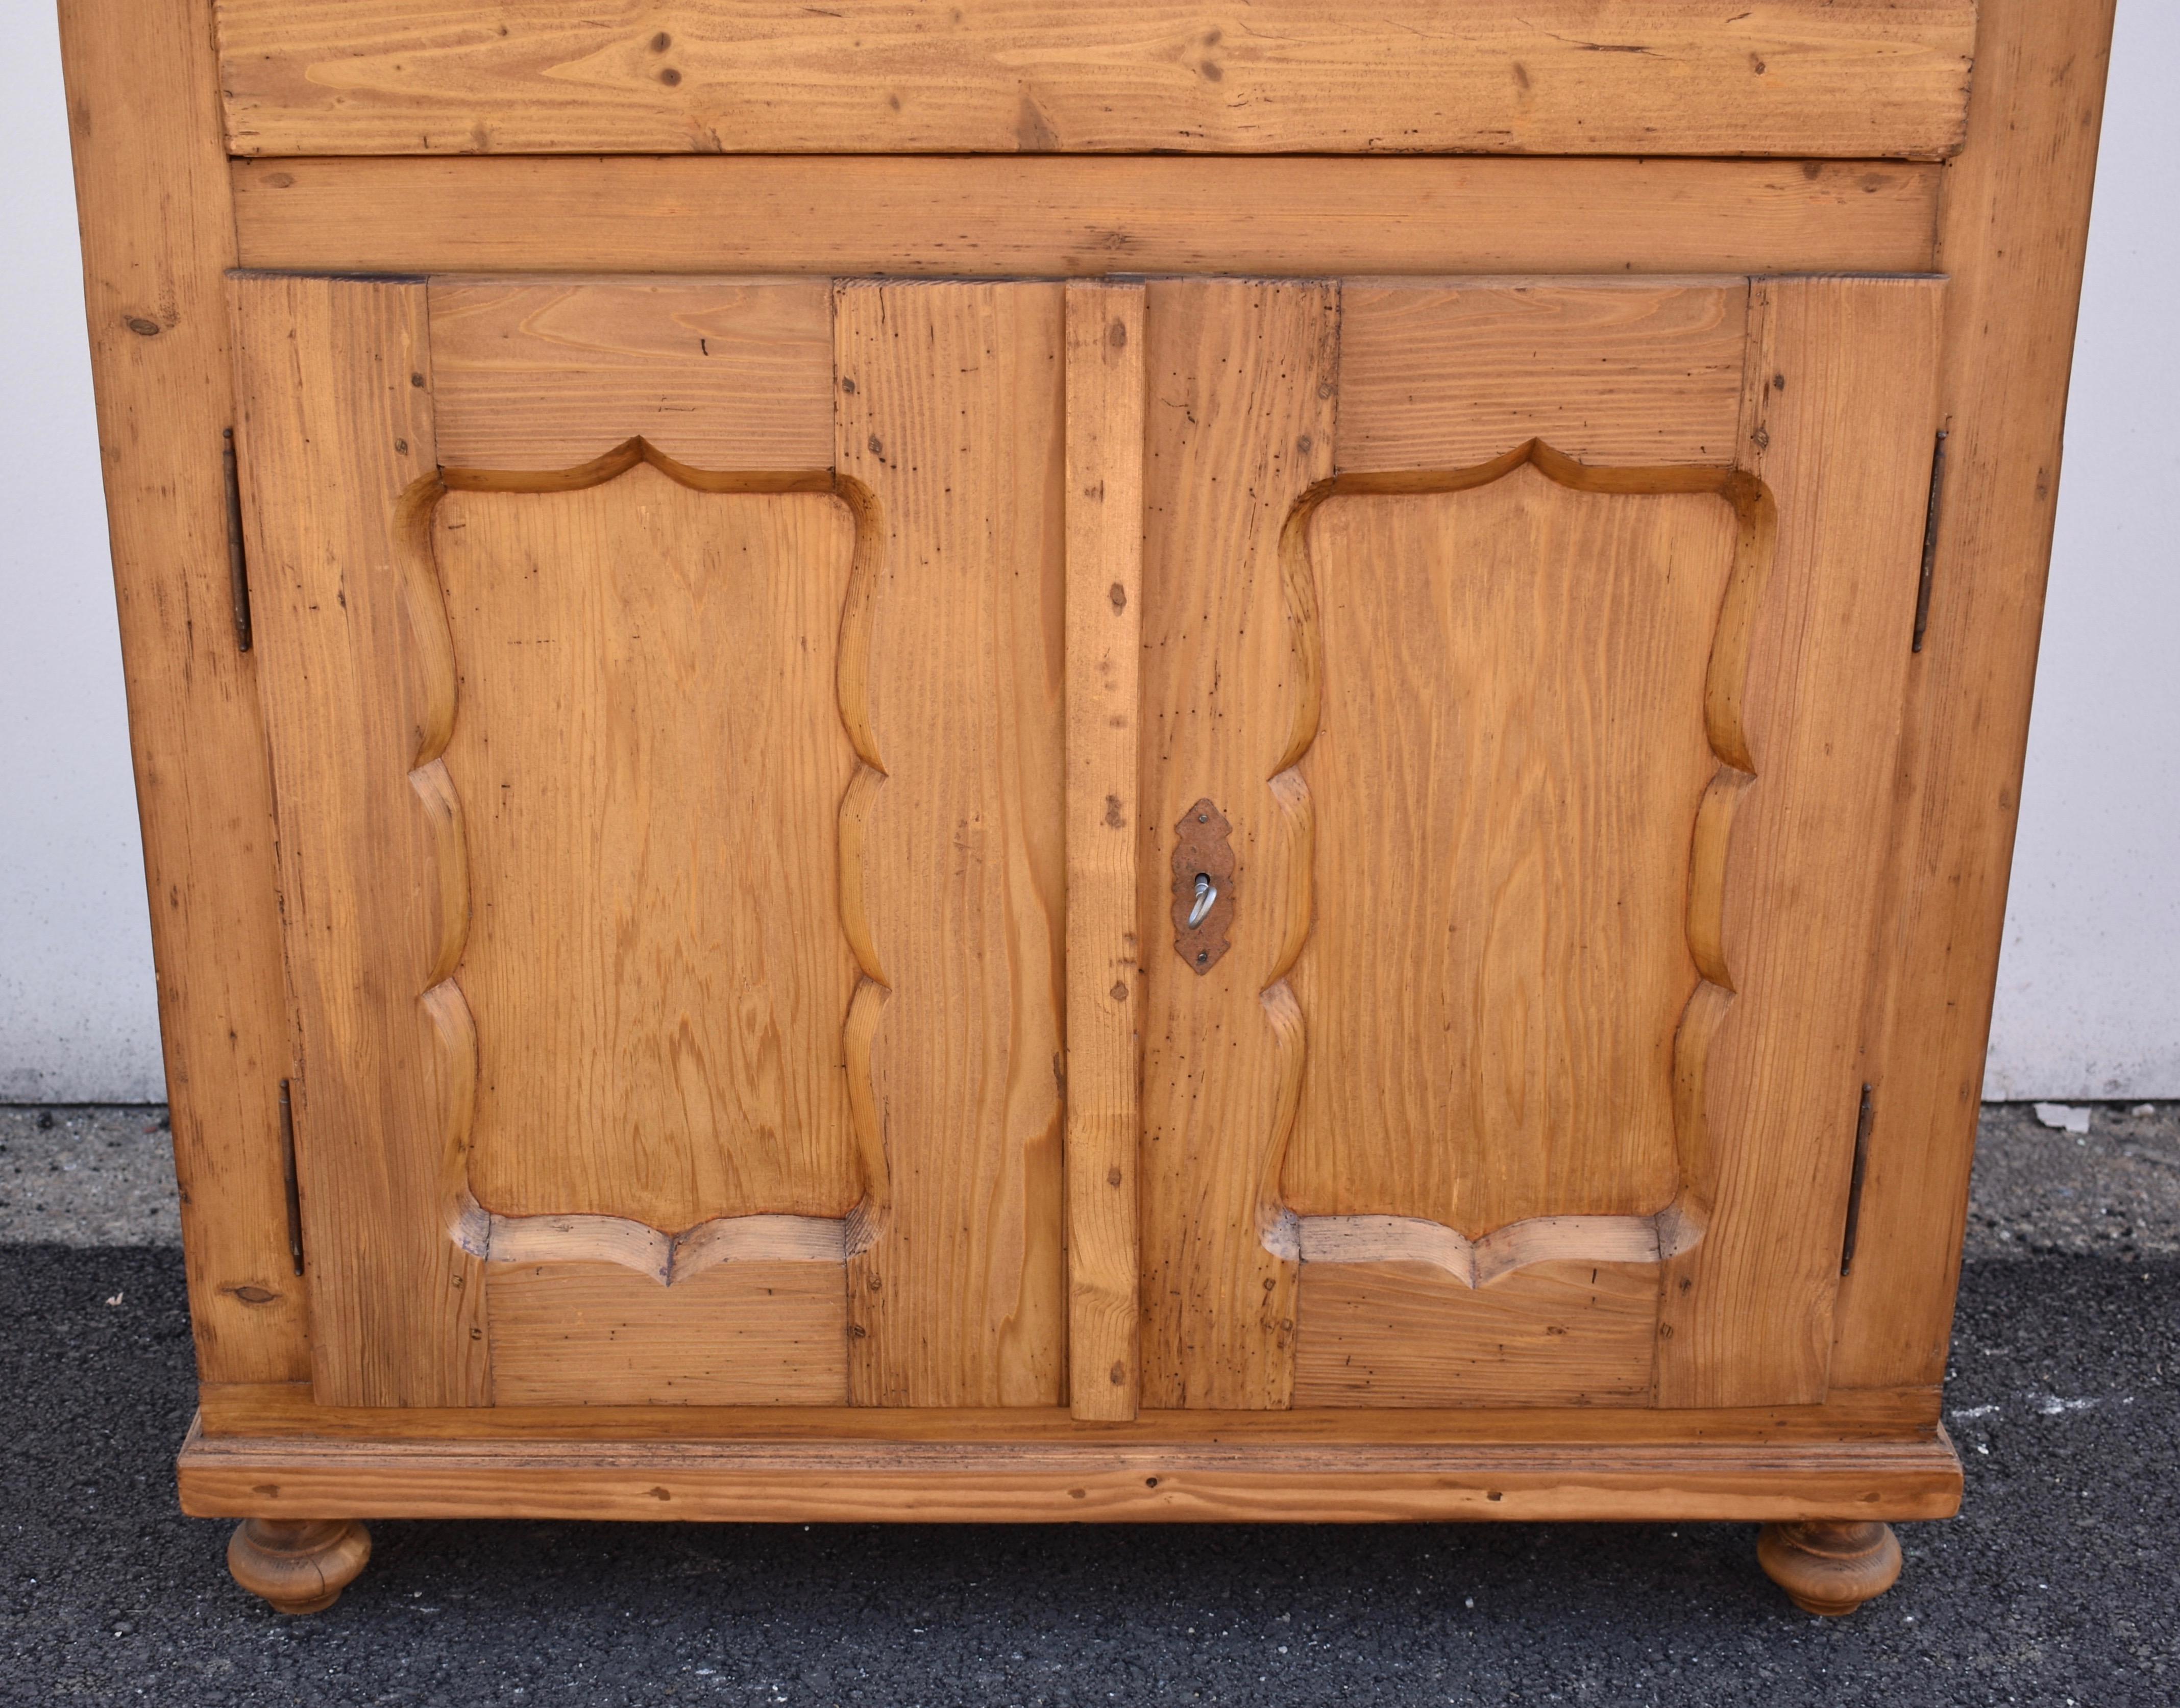 19th Century Pine Dresser Base with Two Doors and One Drawer